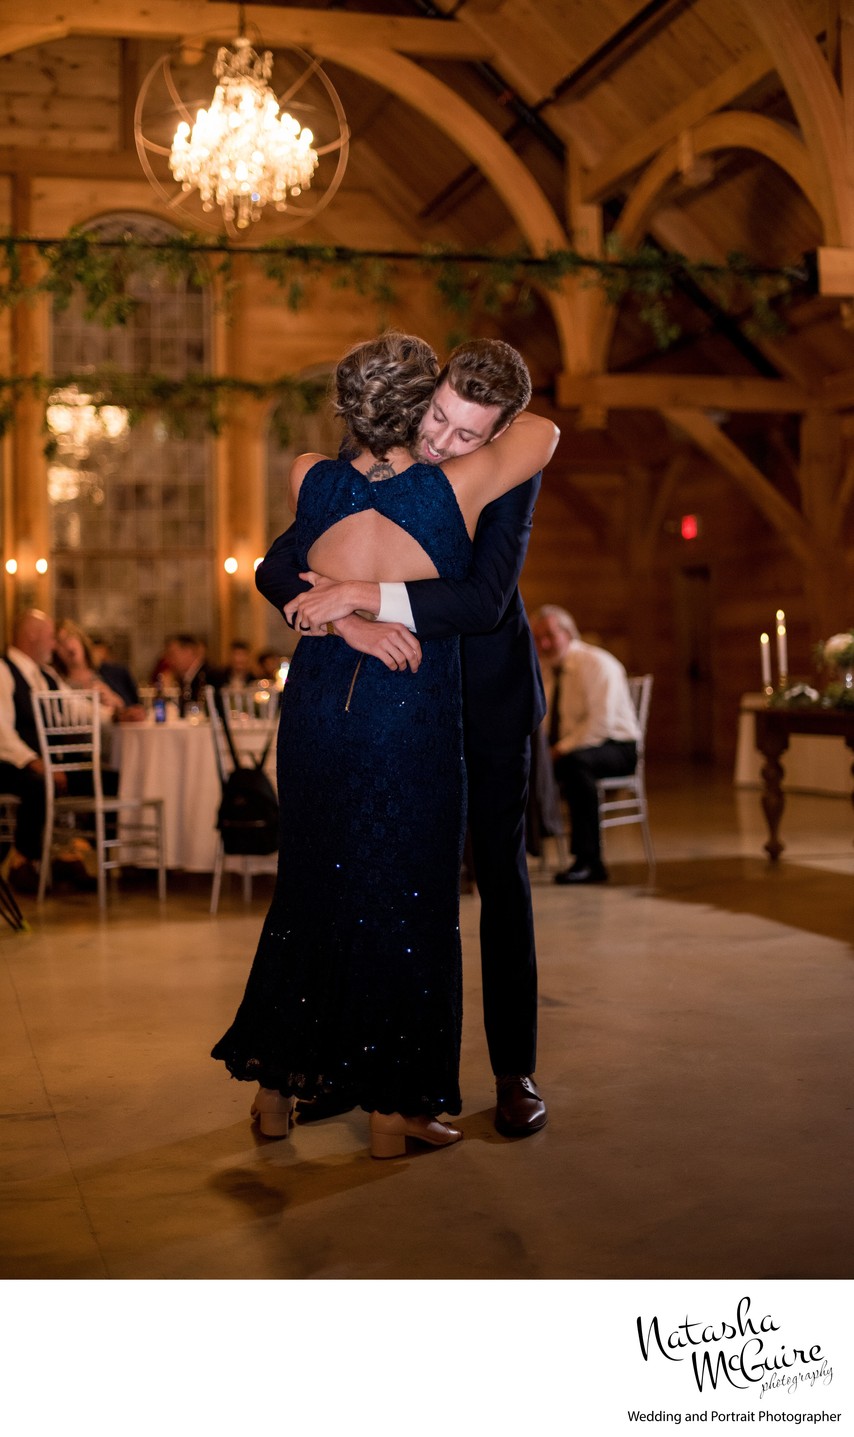 Mother and son dance at wedding reception St Charles